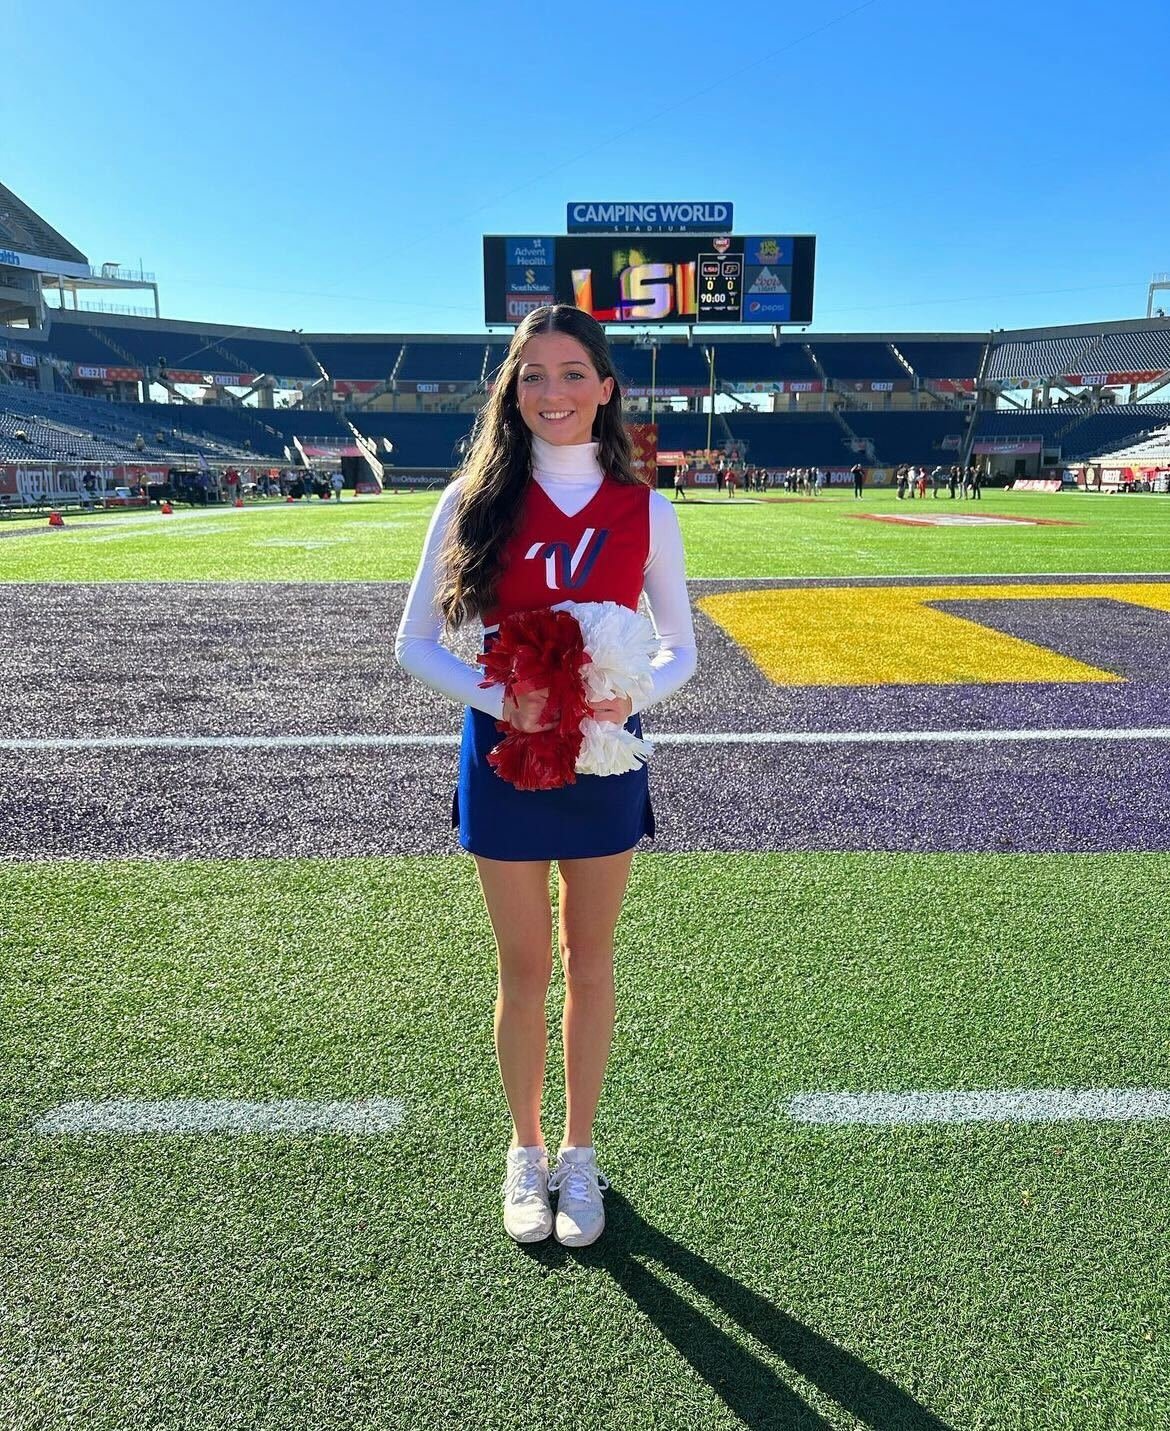 Fairhope senior Michelle Bossard was one of the All-American cheerleaders that participated in the on-field performance at the Cheez-It Citrus Bowl at Camping World Stadium in Orlando Jan. 2. It was not long ago that a shoulder injury nearly ended the cheerleading career of Bossard but she battled back to also earn a college opportunity with the University of Mobile.